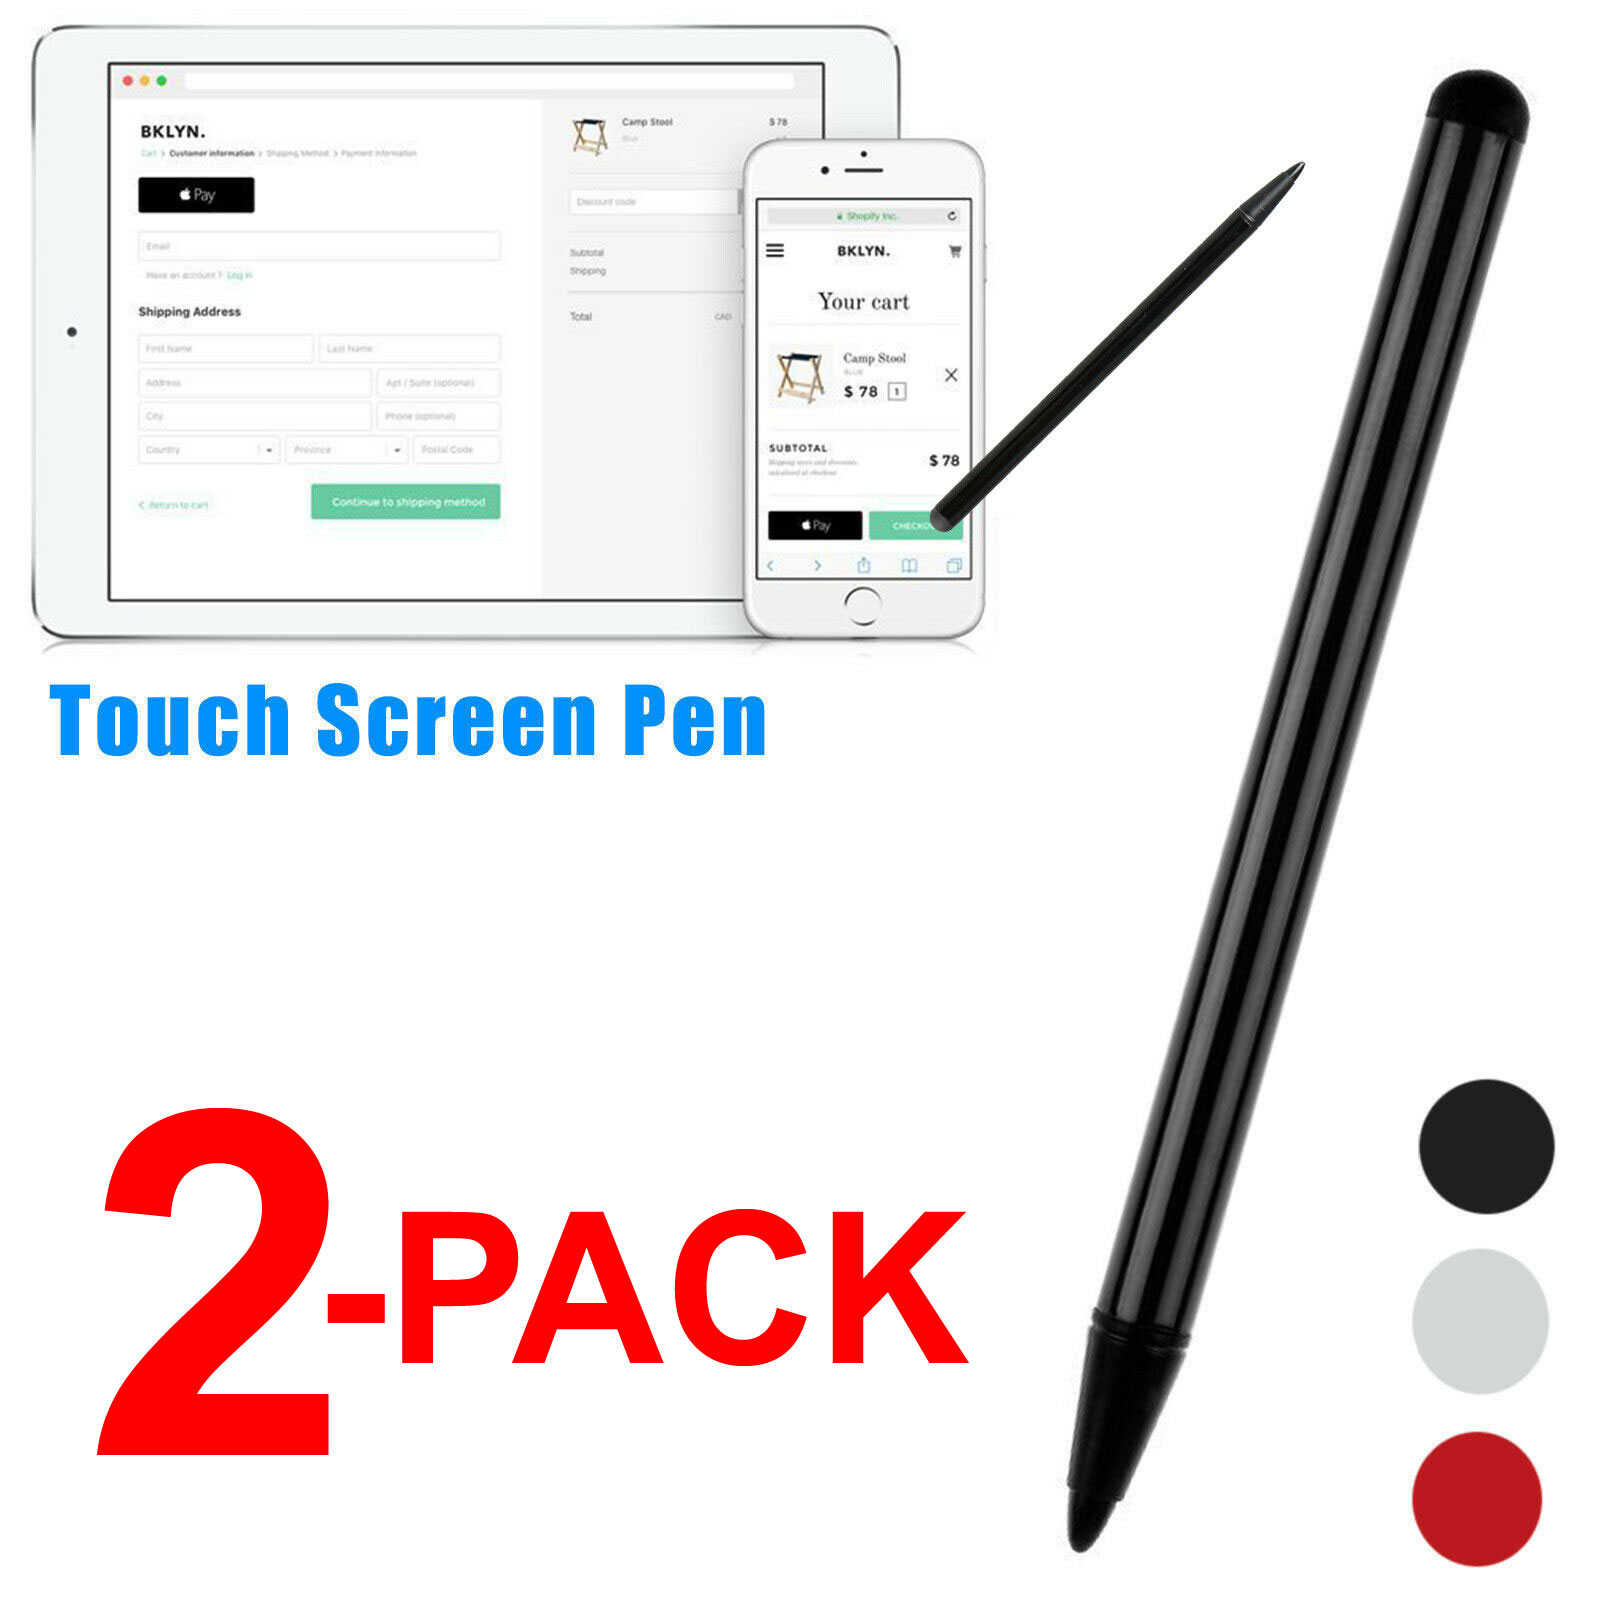 2-pack Touch Screen Pen Stylus Universal For Iphone Ipad Samsung Tablet Phone Pc